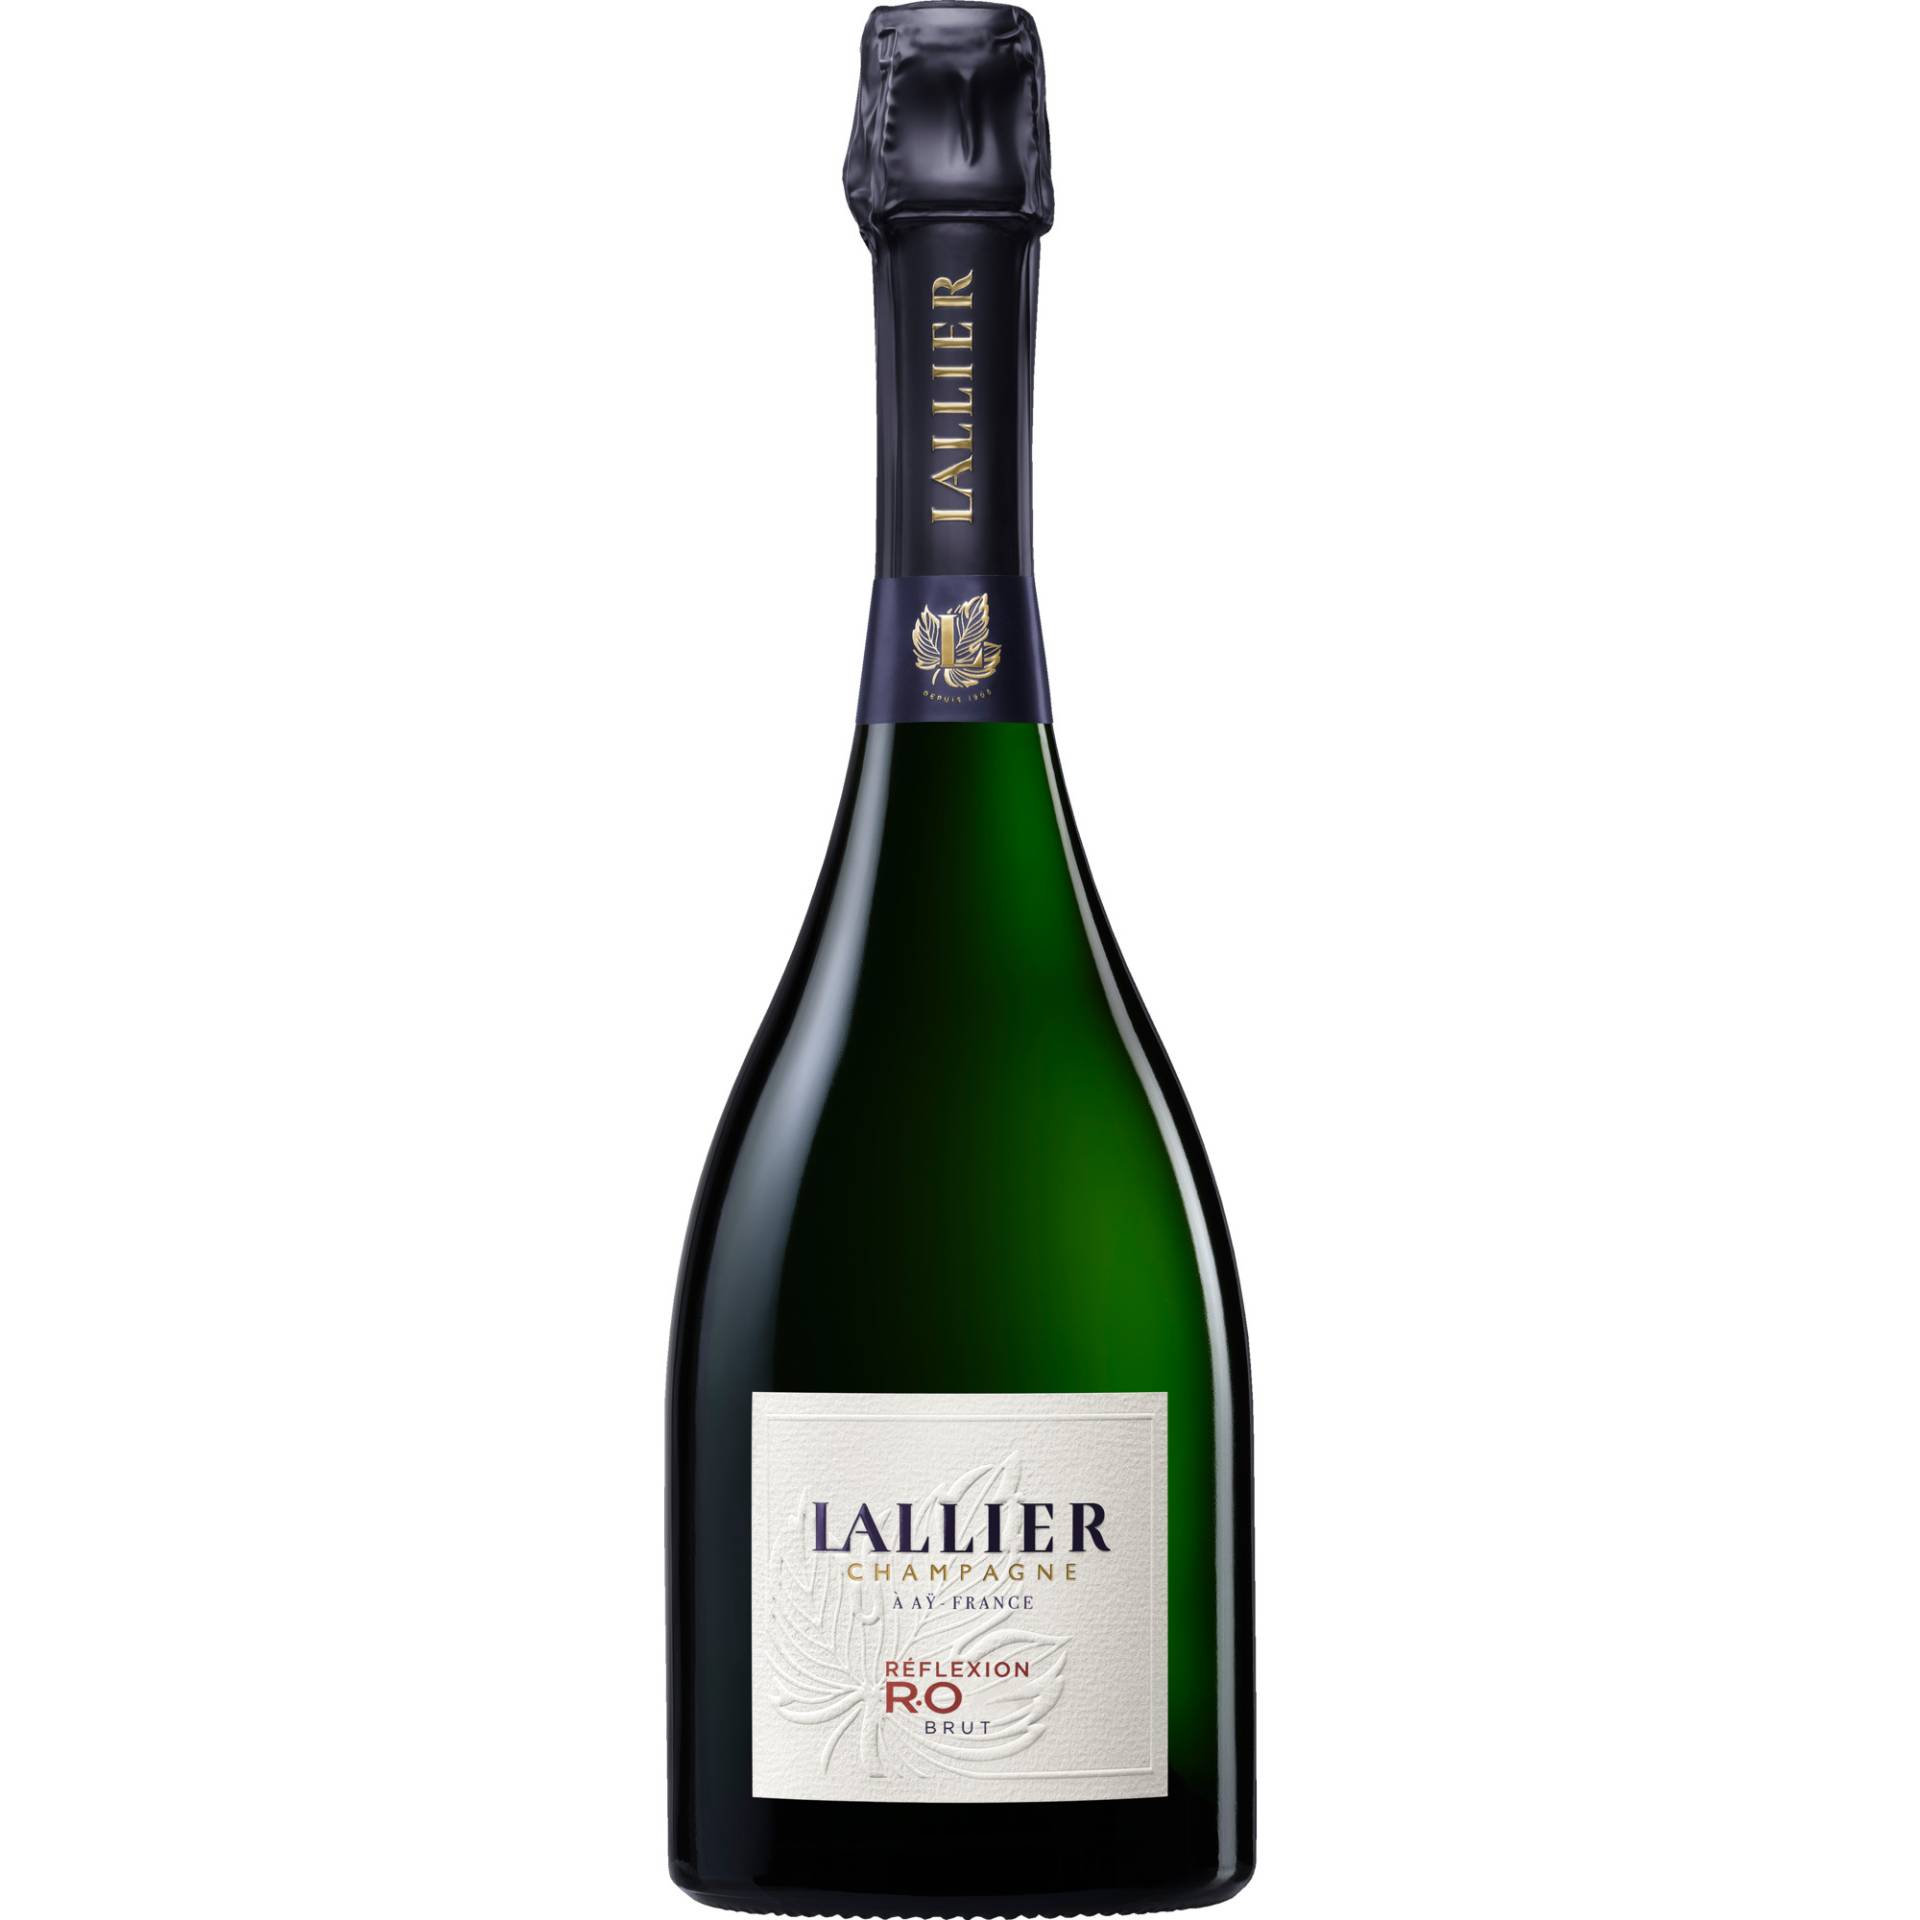 Champagner Lallier Série R020, Brut, Champagne AC, Champagne, Schaumwein von Champagne Lallier, 51160 Ay, France